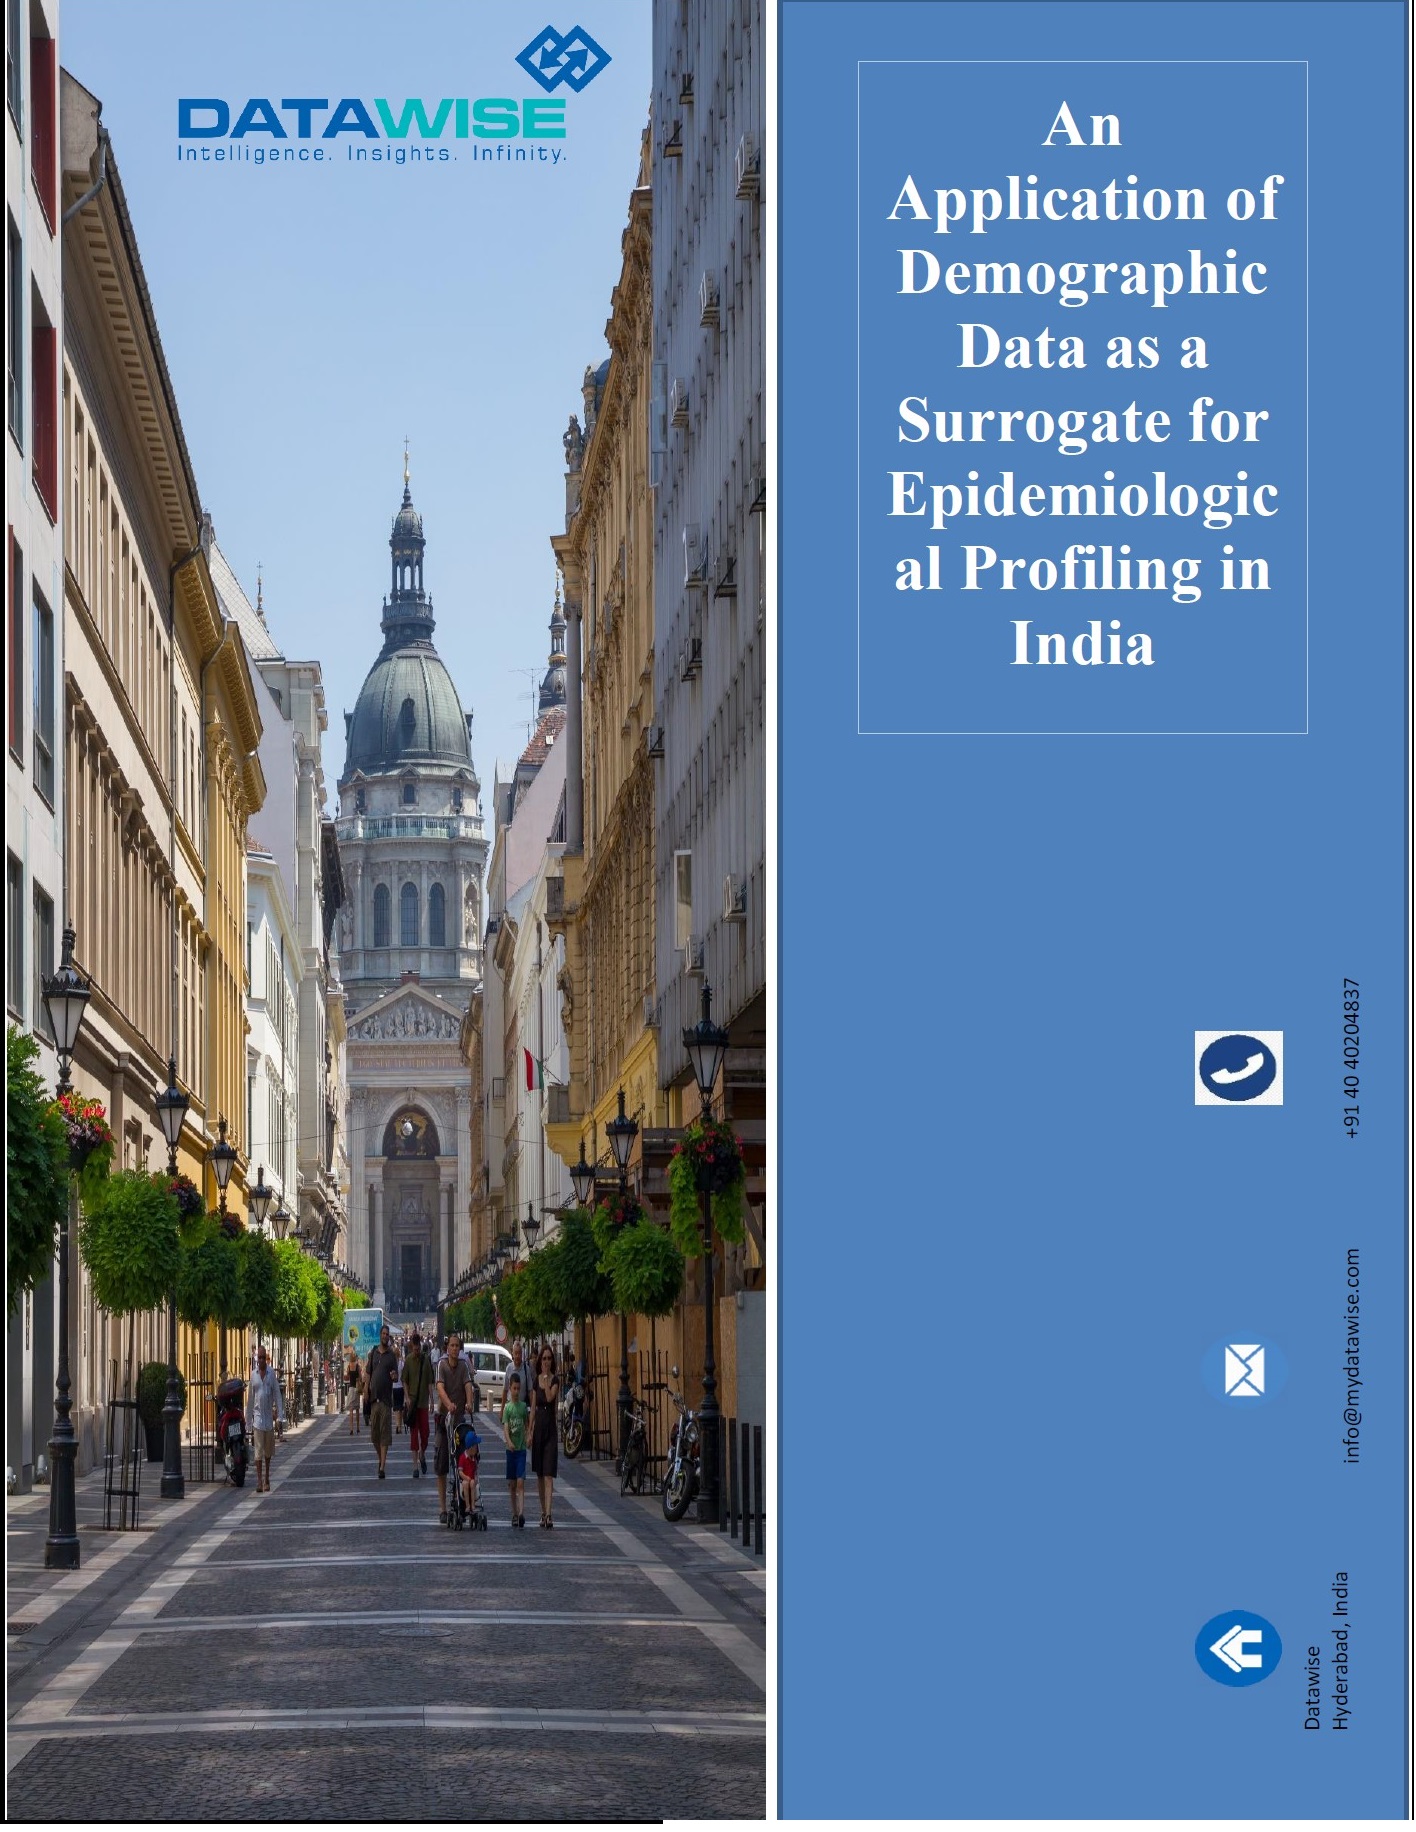 An Application of Demographic Data as a Surrogate for Epidemiological Profiling in India